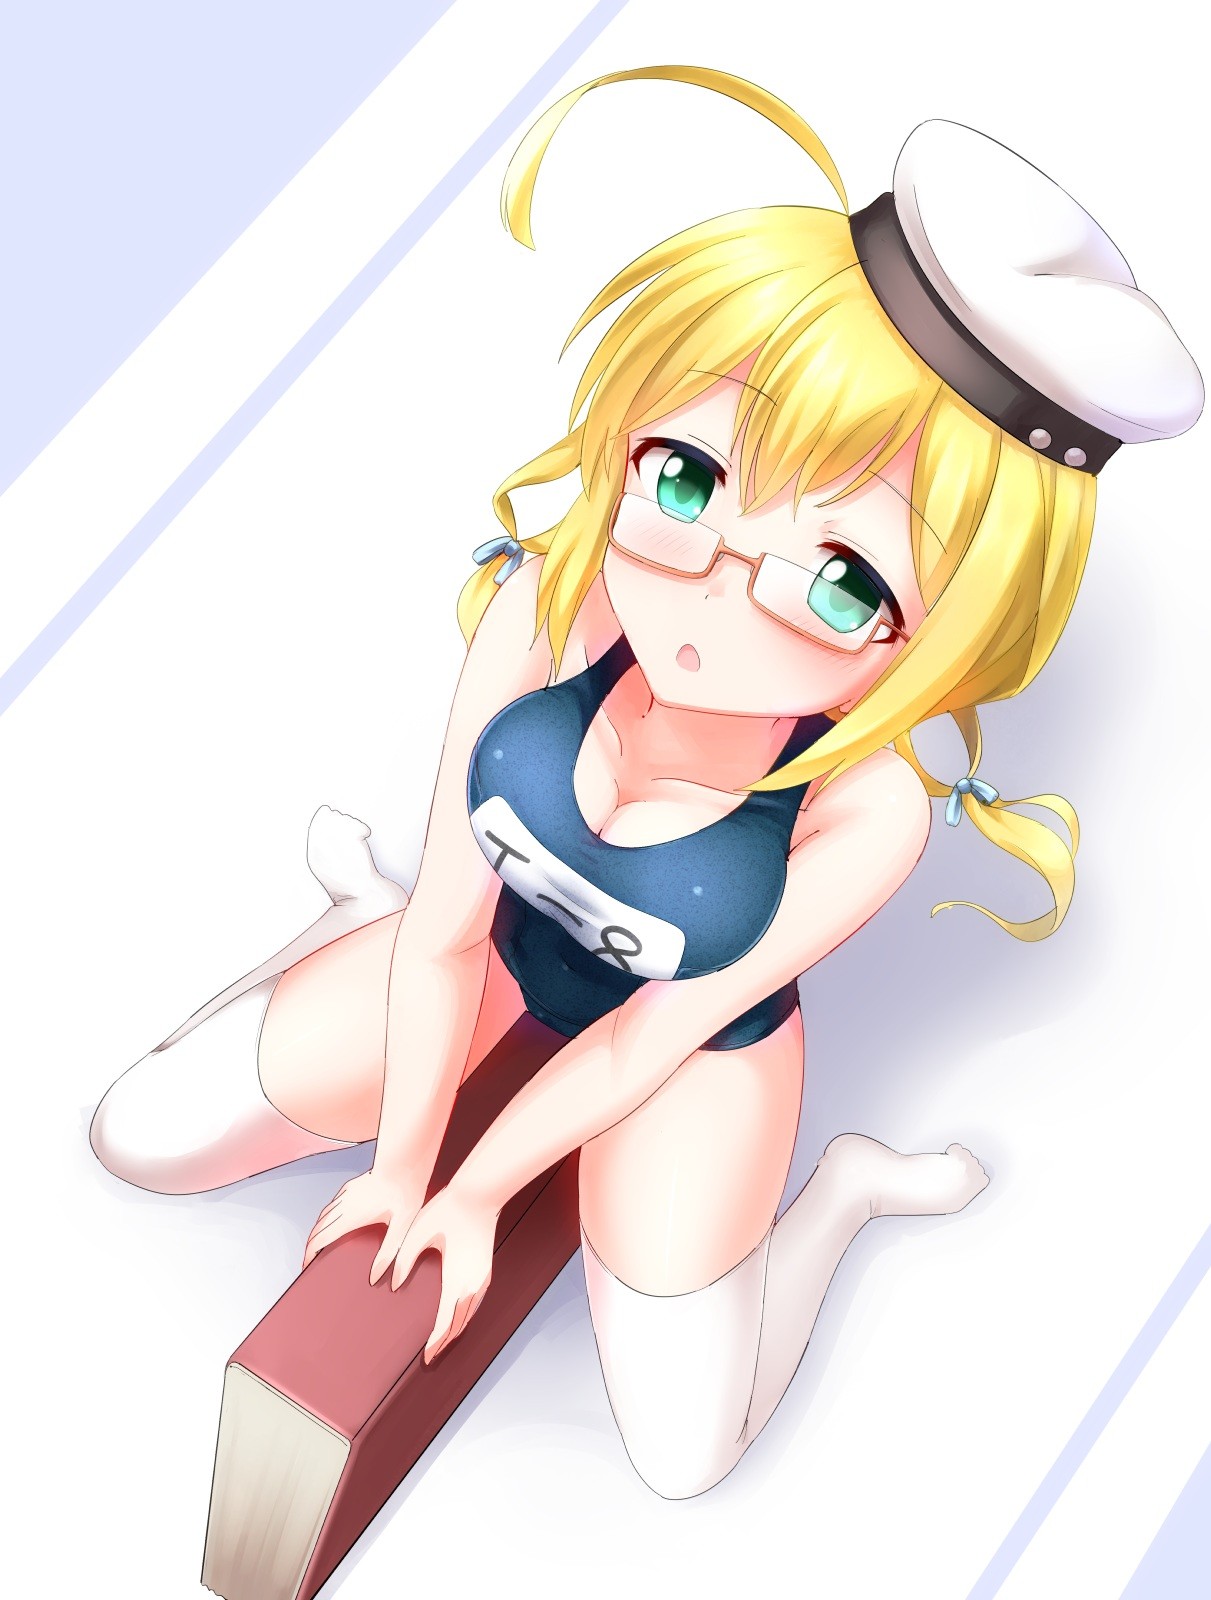 Anime 1211x1600 anime anime girls Kantai Collection I-8 (KanColle) cleavage long hair blonde green eyes glasses thigh-highs Pixiv boobs big boobs looking at viewer stockings white stockings sitting looking up high angle hat women with hats